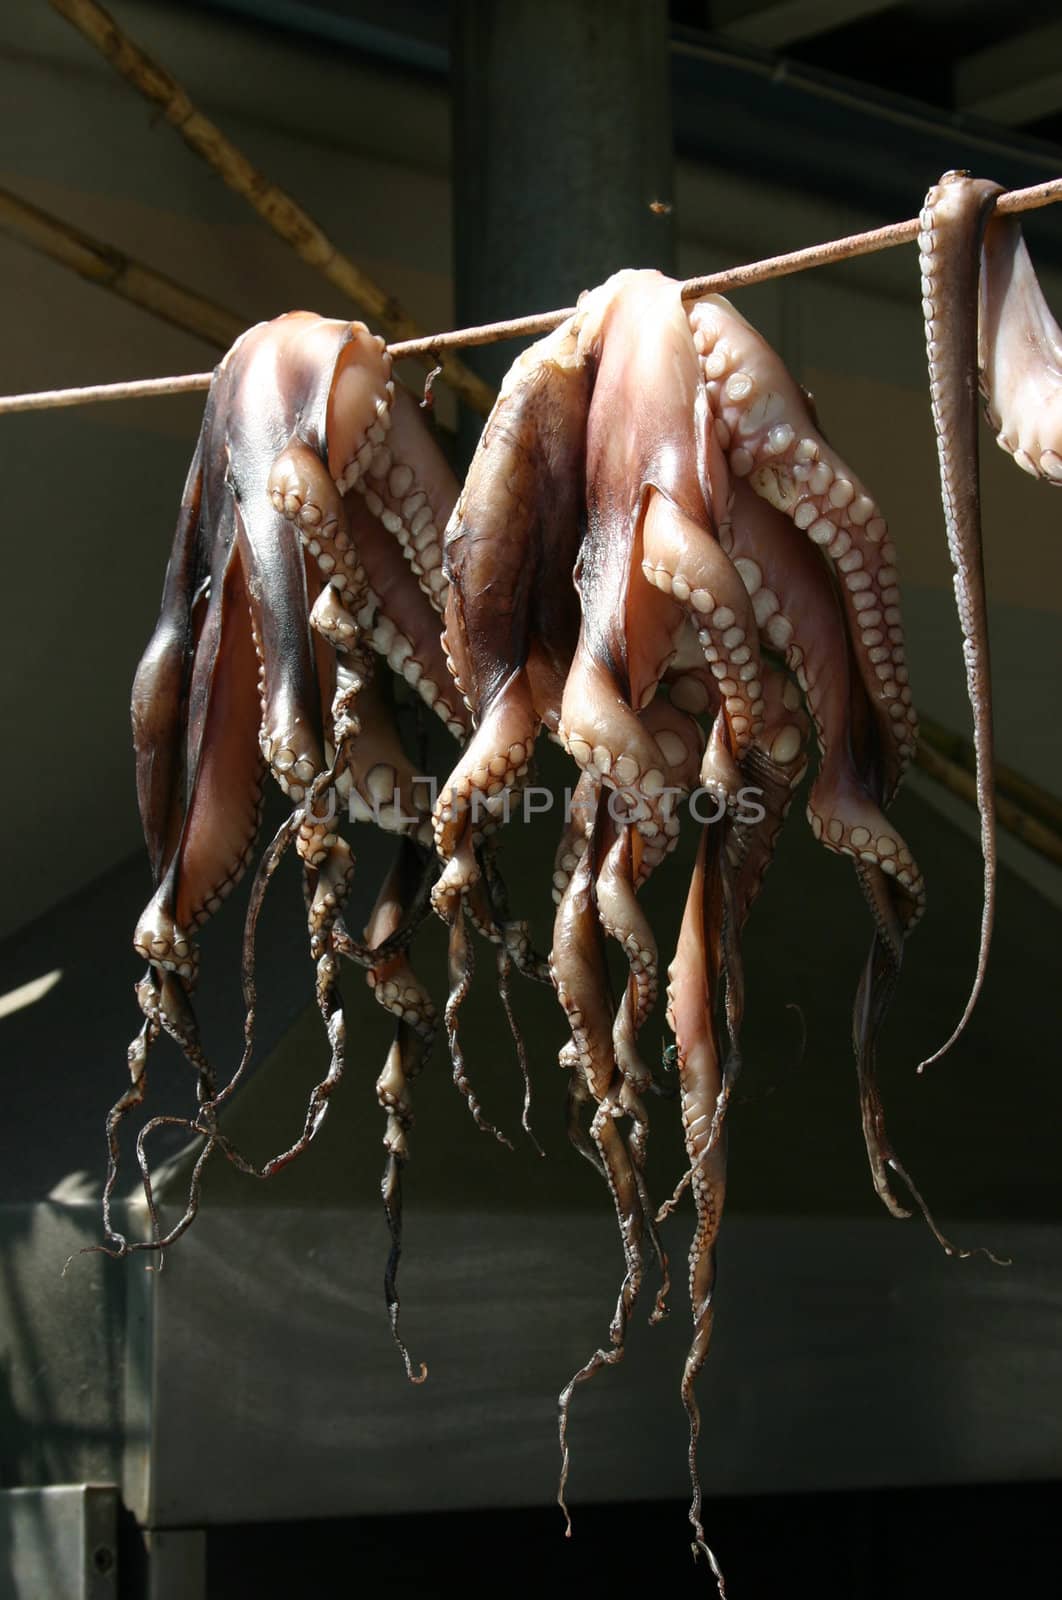 Drying traditional Greek octopus sea food outdoors